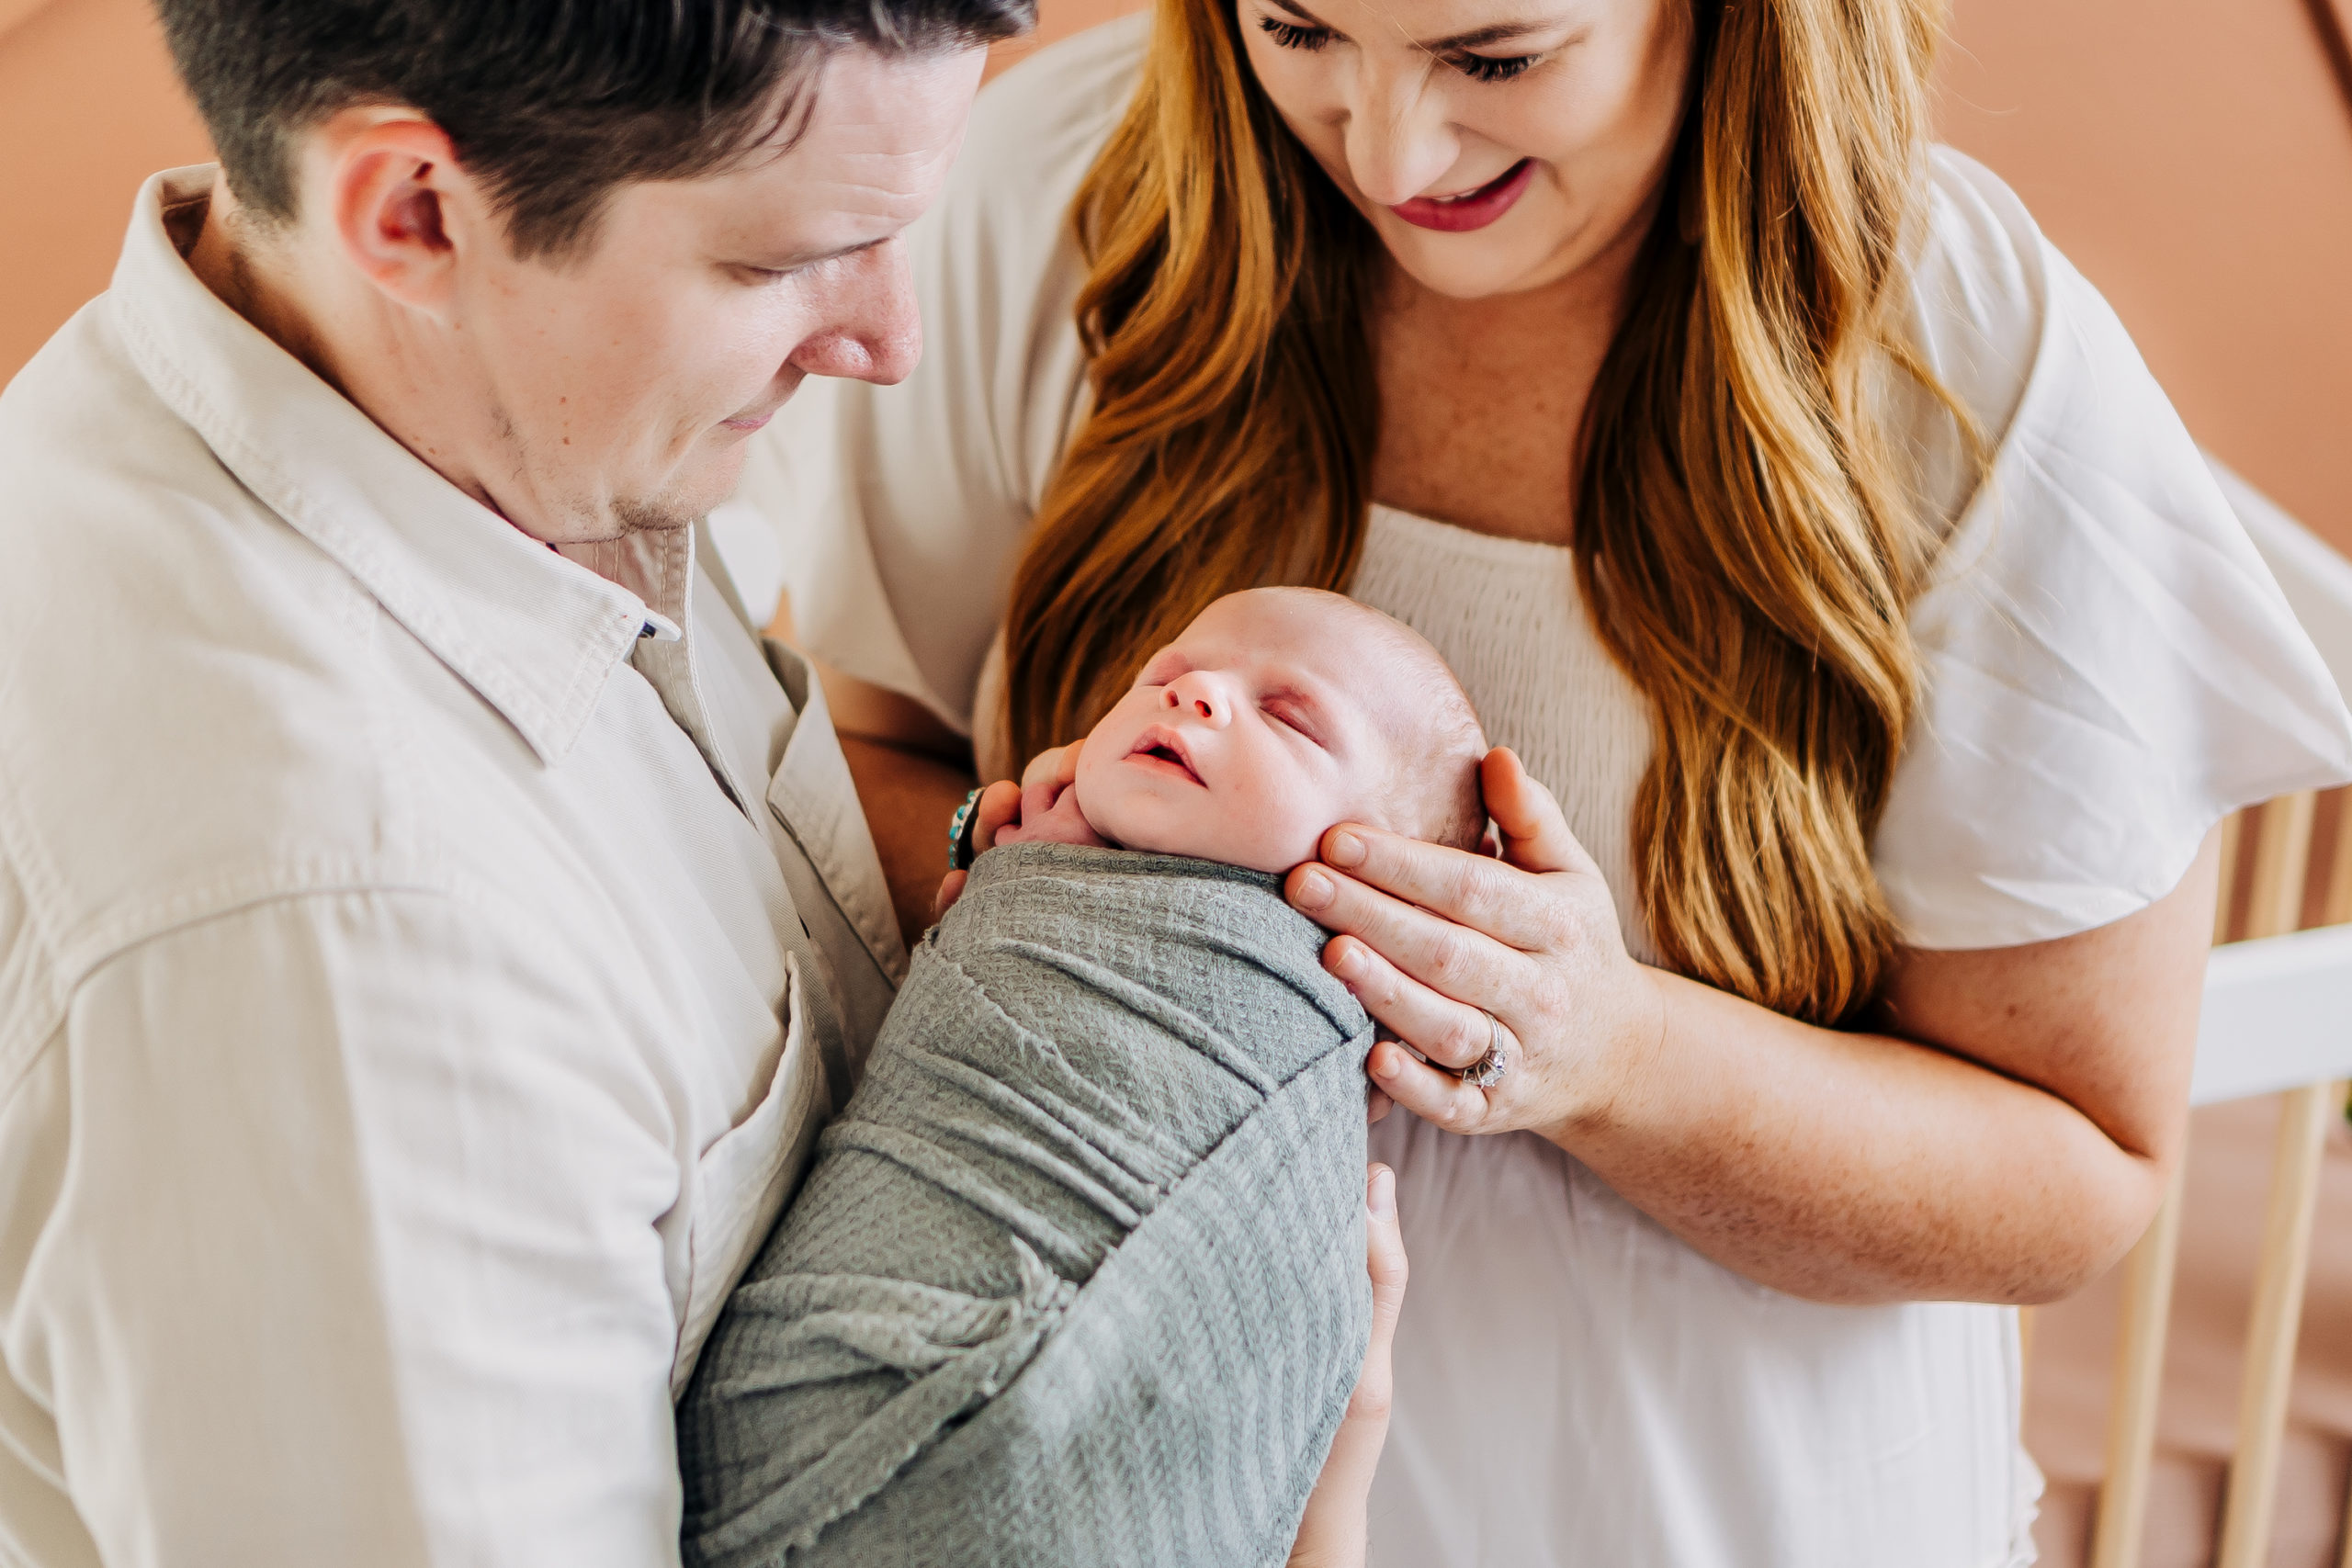 Family Session In-Home with Newborn | In-Home Newborn and Family Session | Frisco, Texas Photographer | via brittnierenee.com